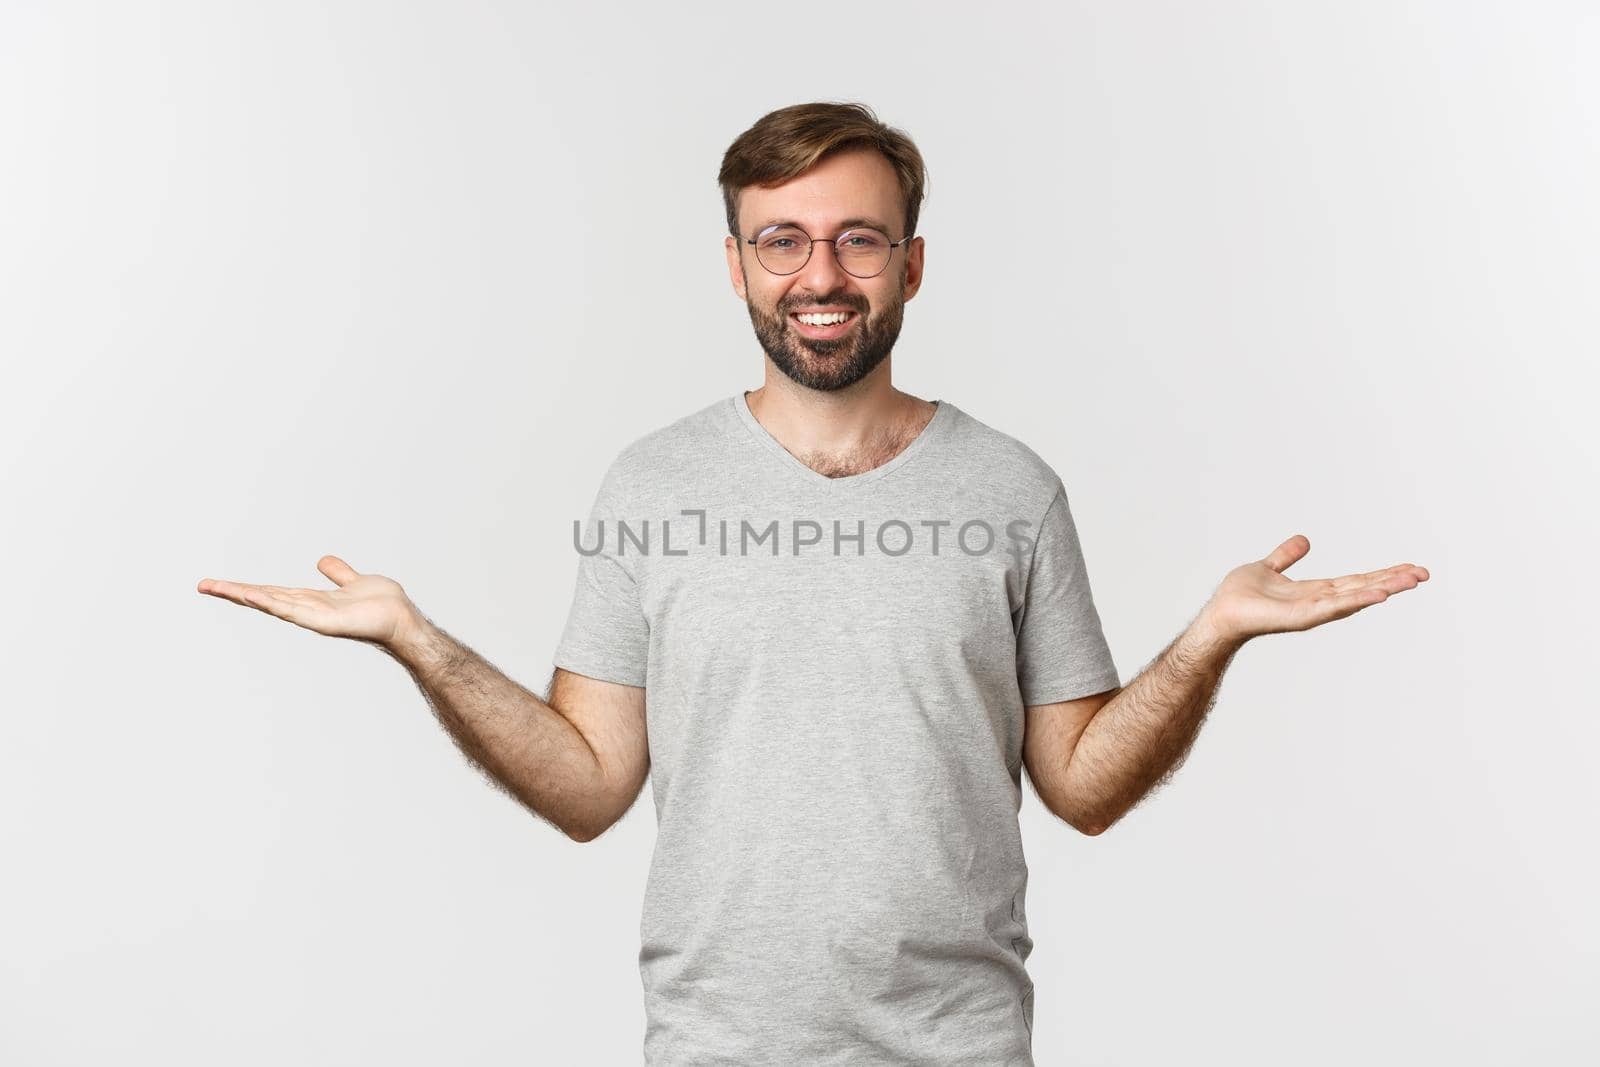 Handsome man with beard, wearing gray t-shirt and glasses, spread hands sideways and holding two things, demonstrate products, standing over white background.